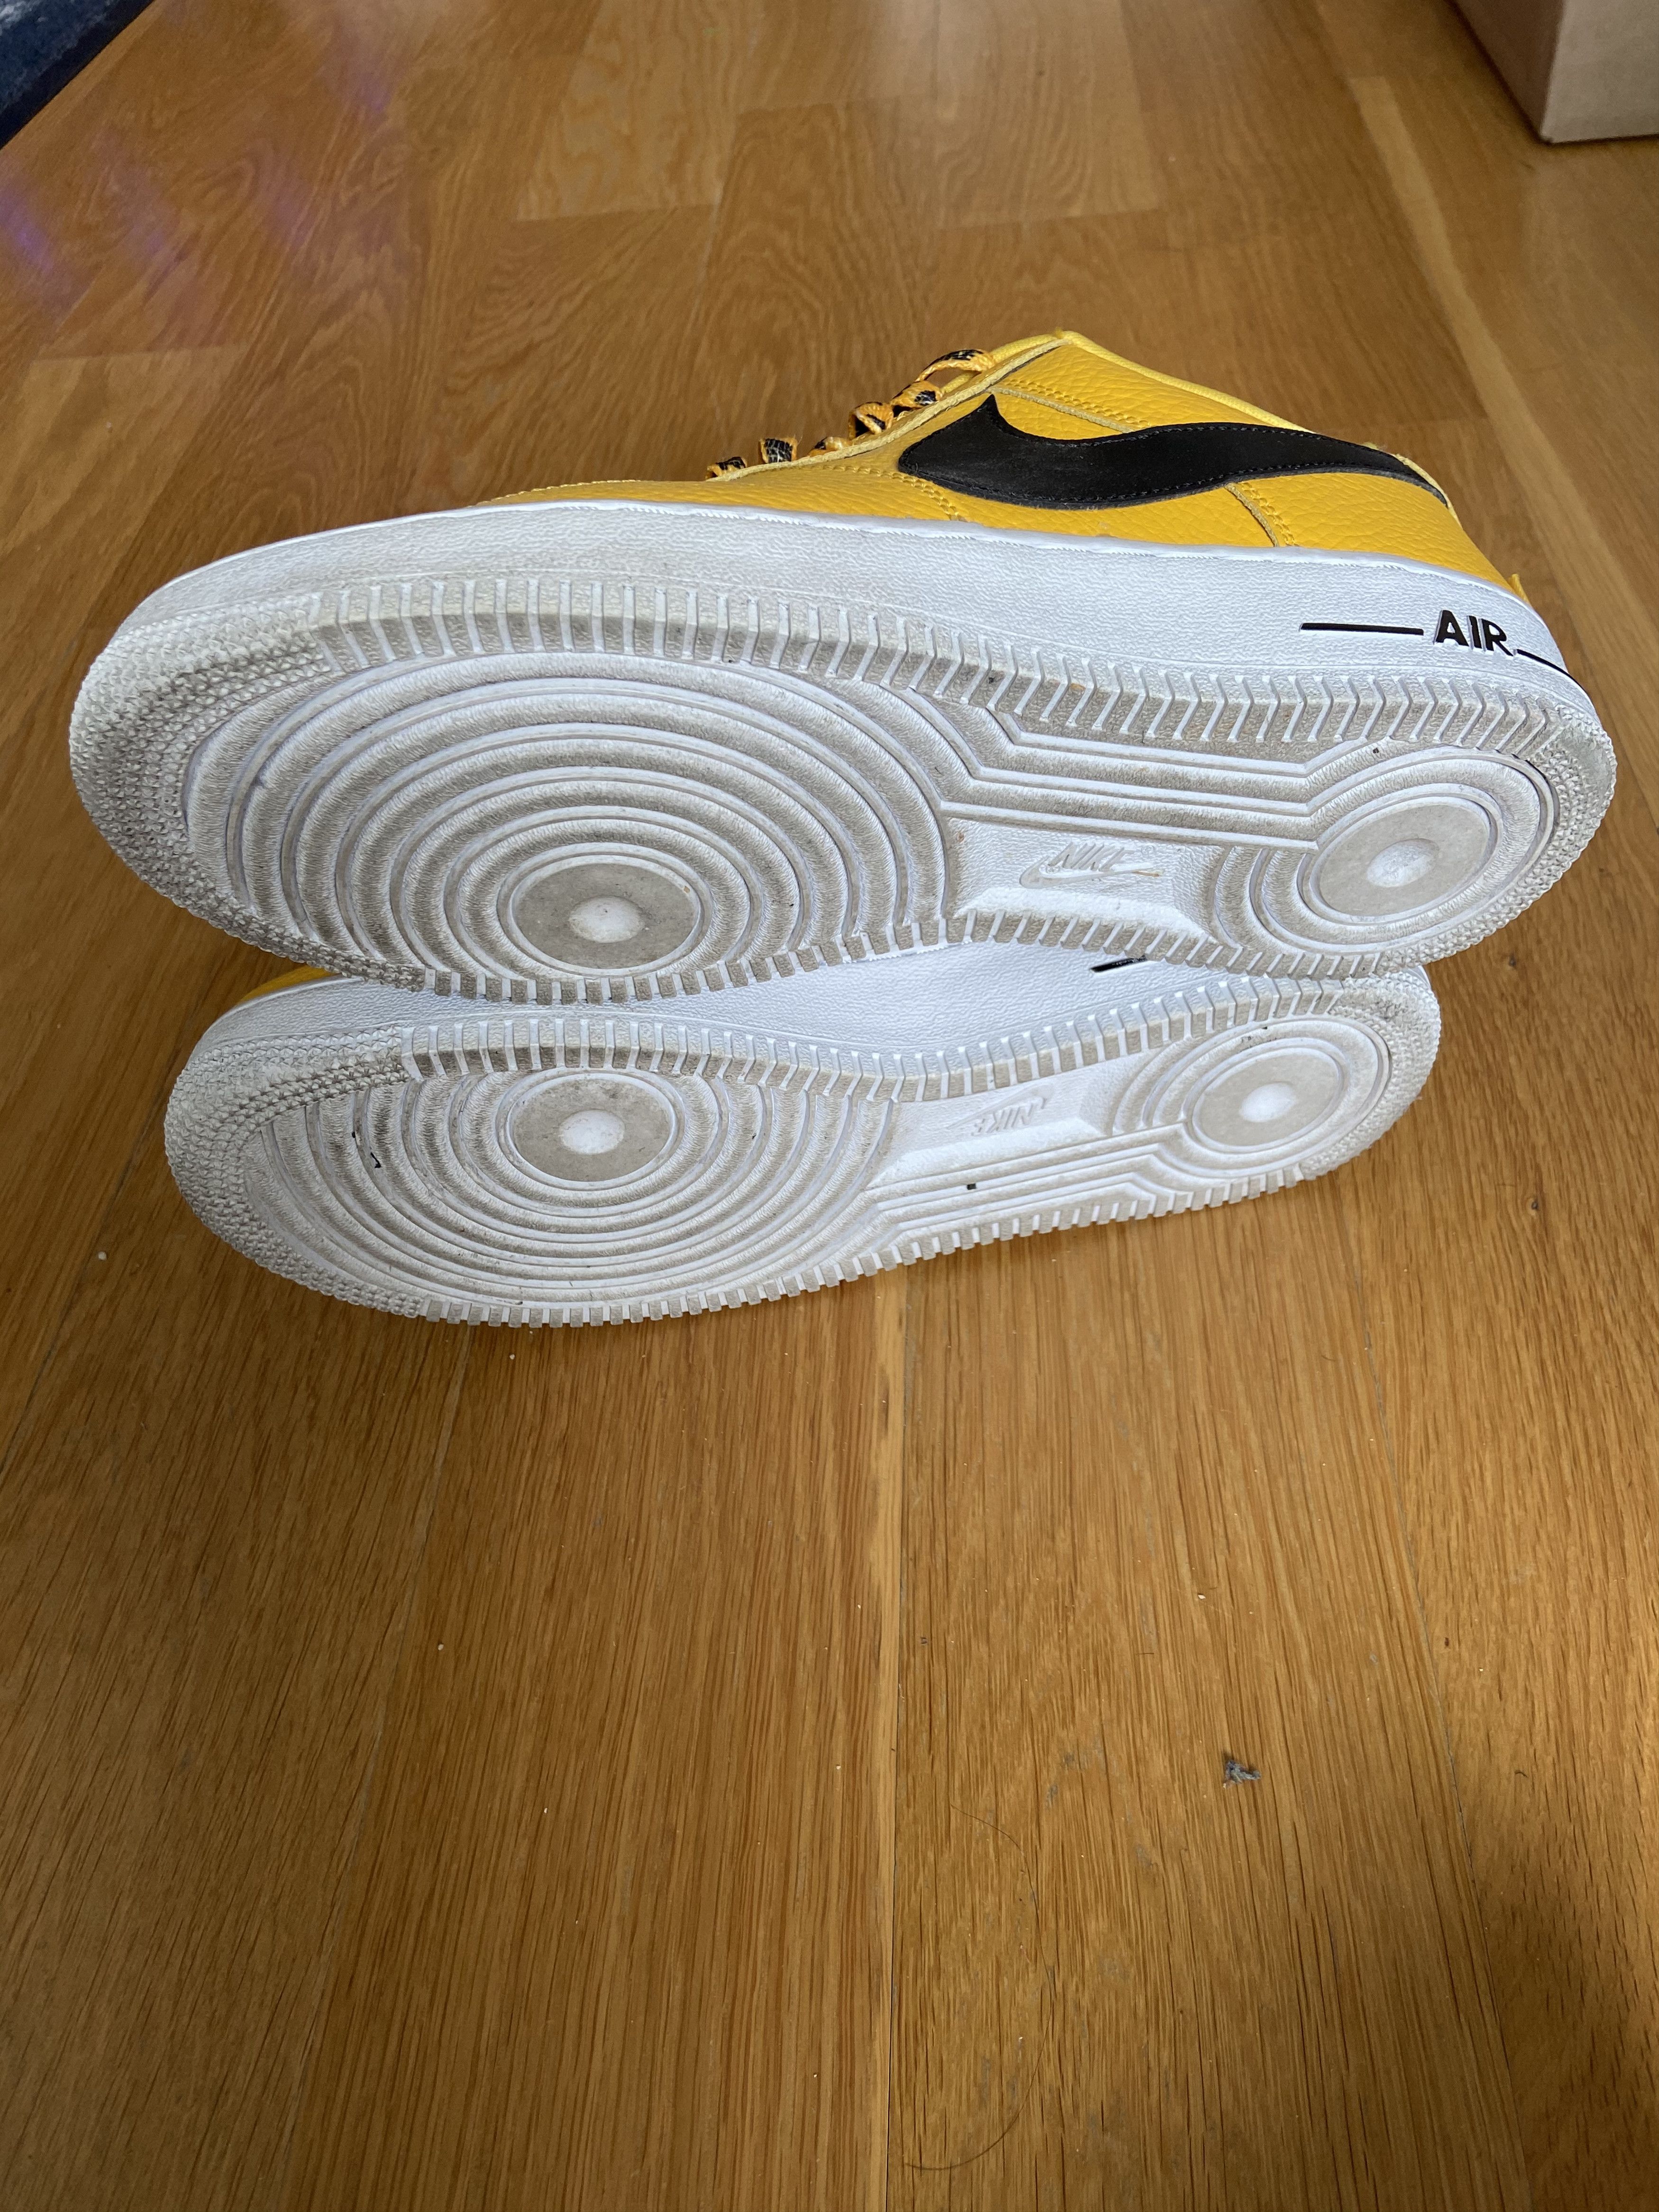 Nike Air Force 1 Low Yellow NBA Edition Size US 8 / EU 41 - 4 Preview